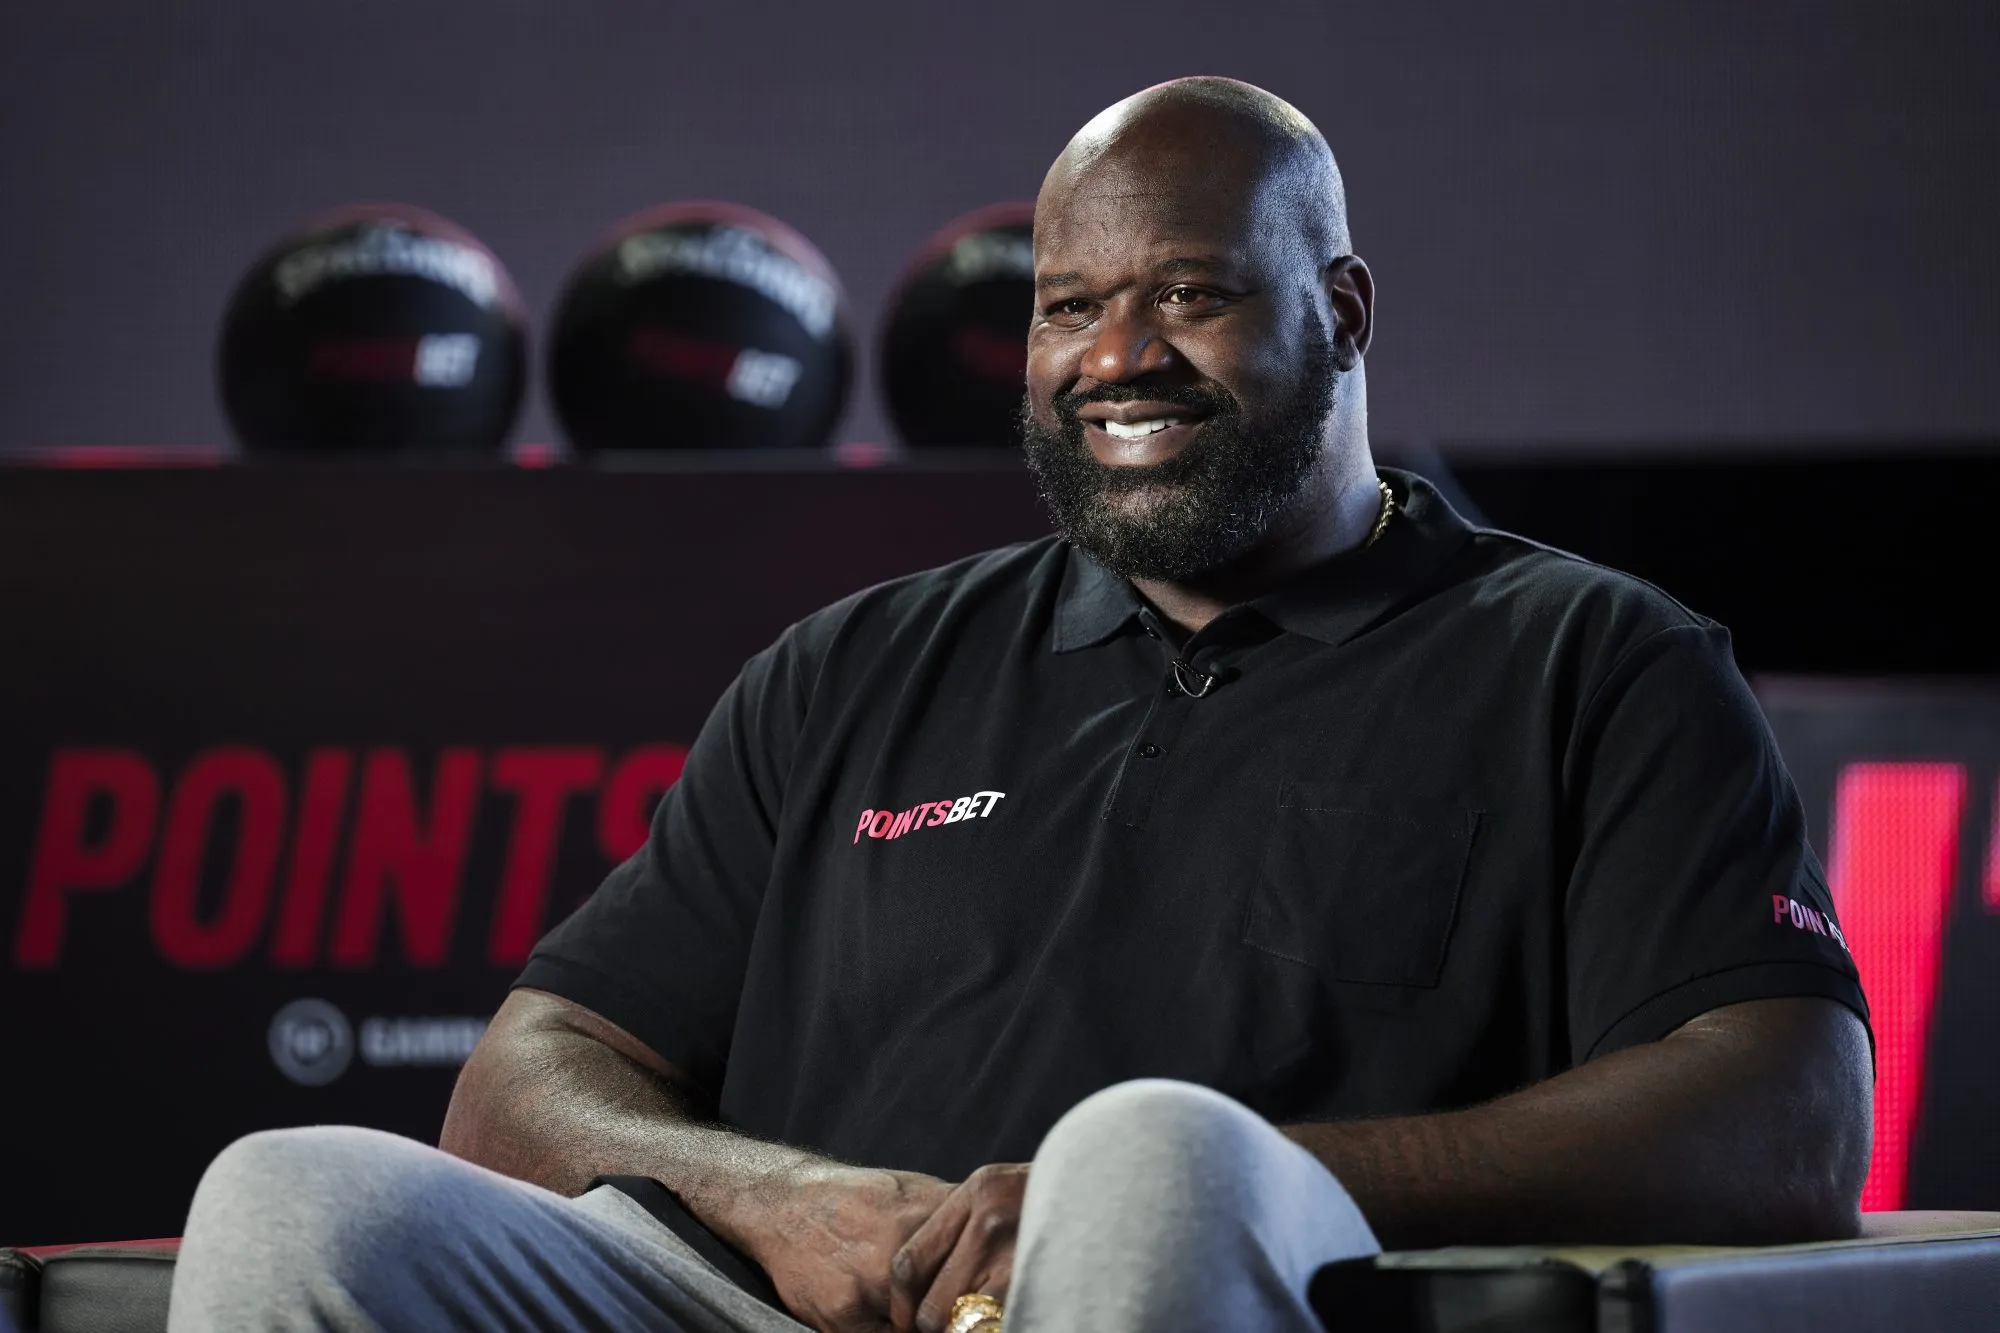 SHAQUILLE O’NEAL WISHES HE WAS A ‘LITTLE BIT SMALLER’